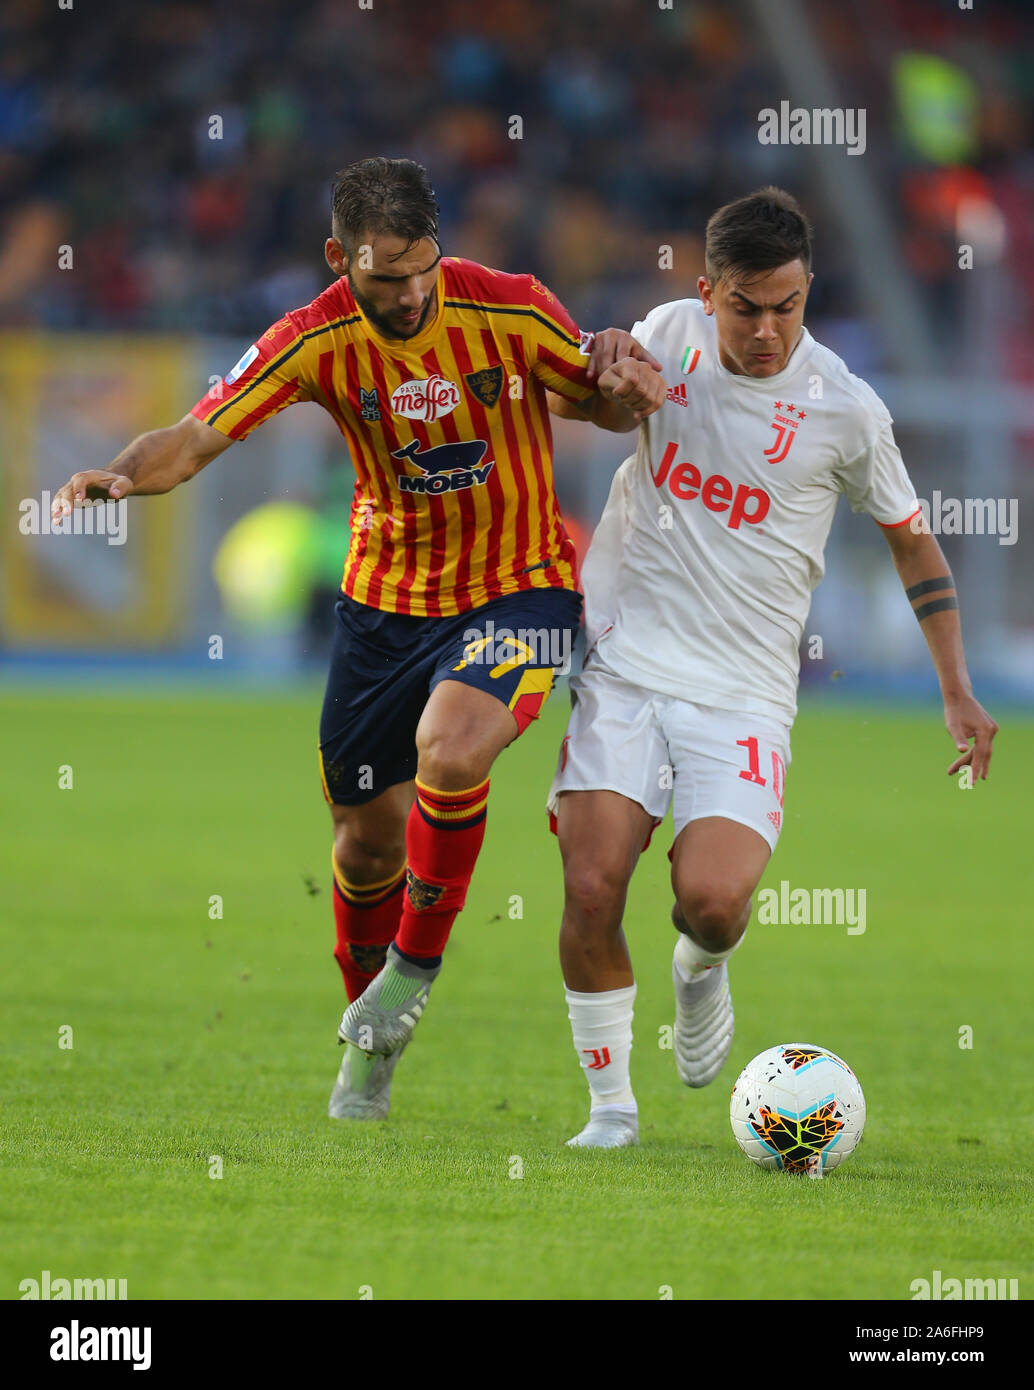 Lecce, Italy. 26th October 2019. Juventus' Argentinian forward Paulo Dybala (R) fights for the ball with Lecce's Greek midfielder Panagiotis Tachtsidis during the Italian Serie A football match US Lecce vs Juventus FC on October 26 2019 at the Via del Mare-Ettore Giardiniero Stadium. Lecce drew with Juventus 1-1. Credit: Independent Photo Agency Srl/Alamy Live News Stock Photo